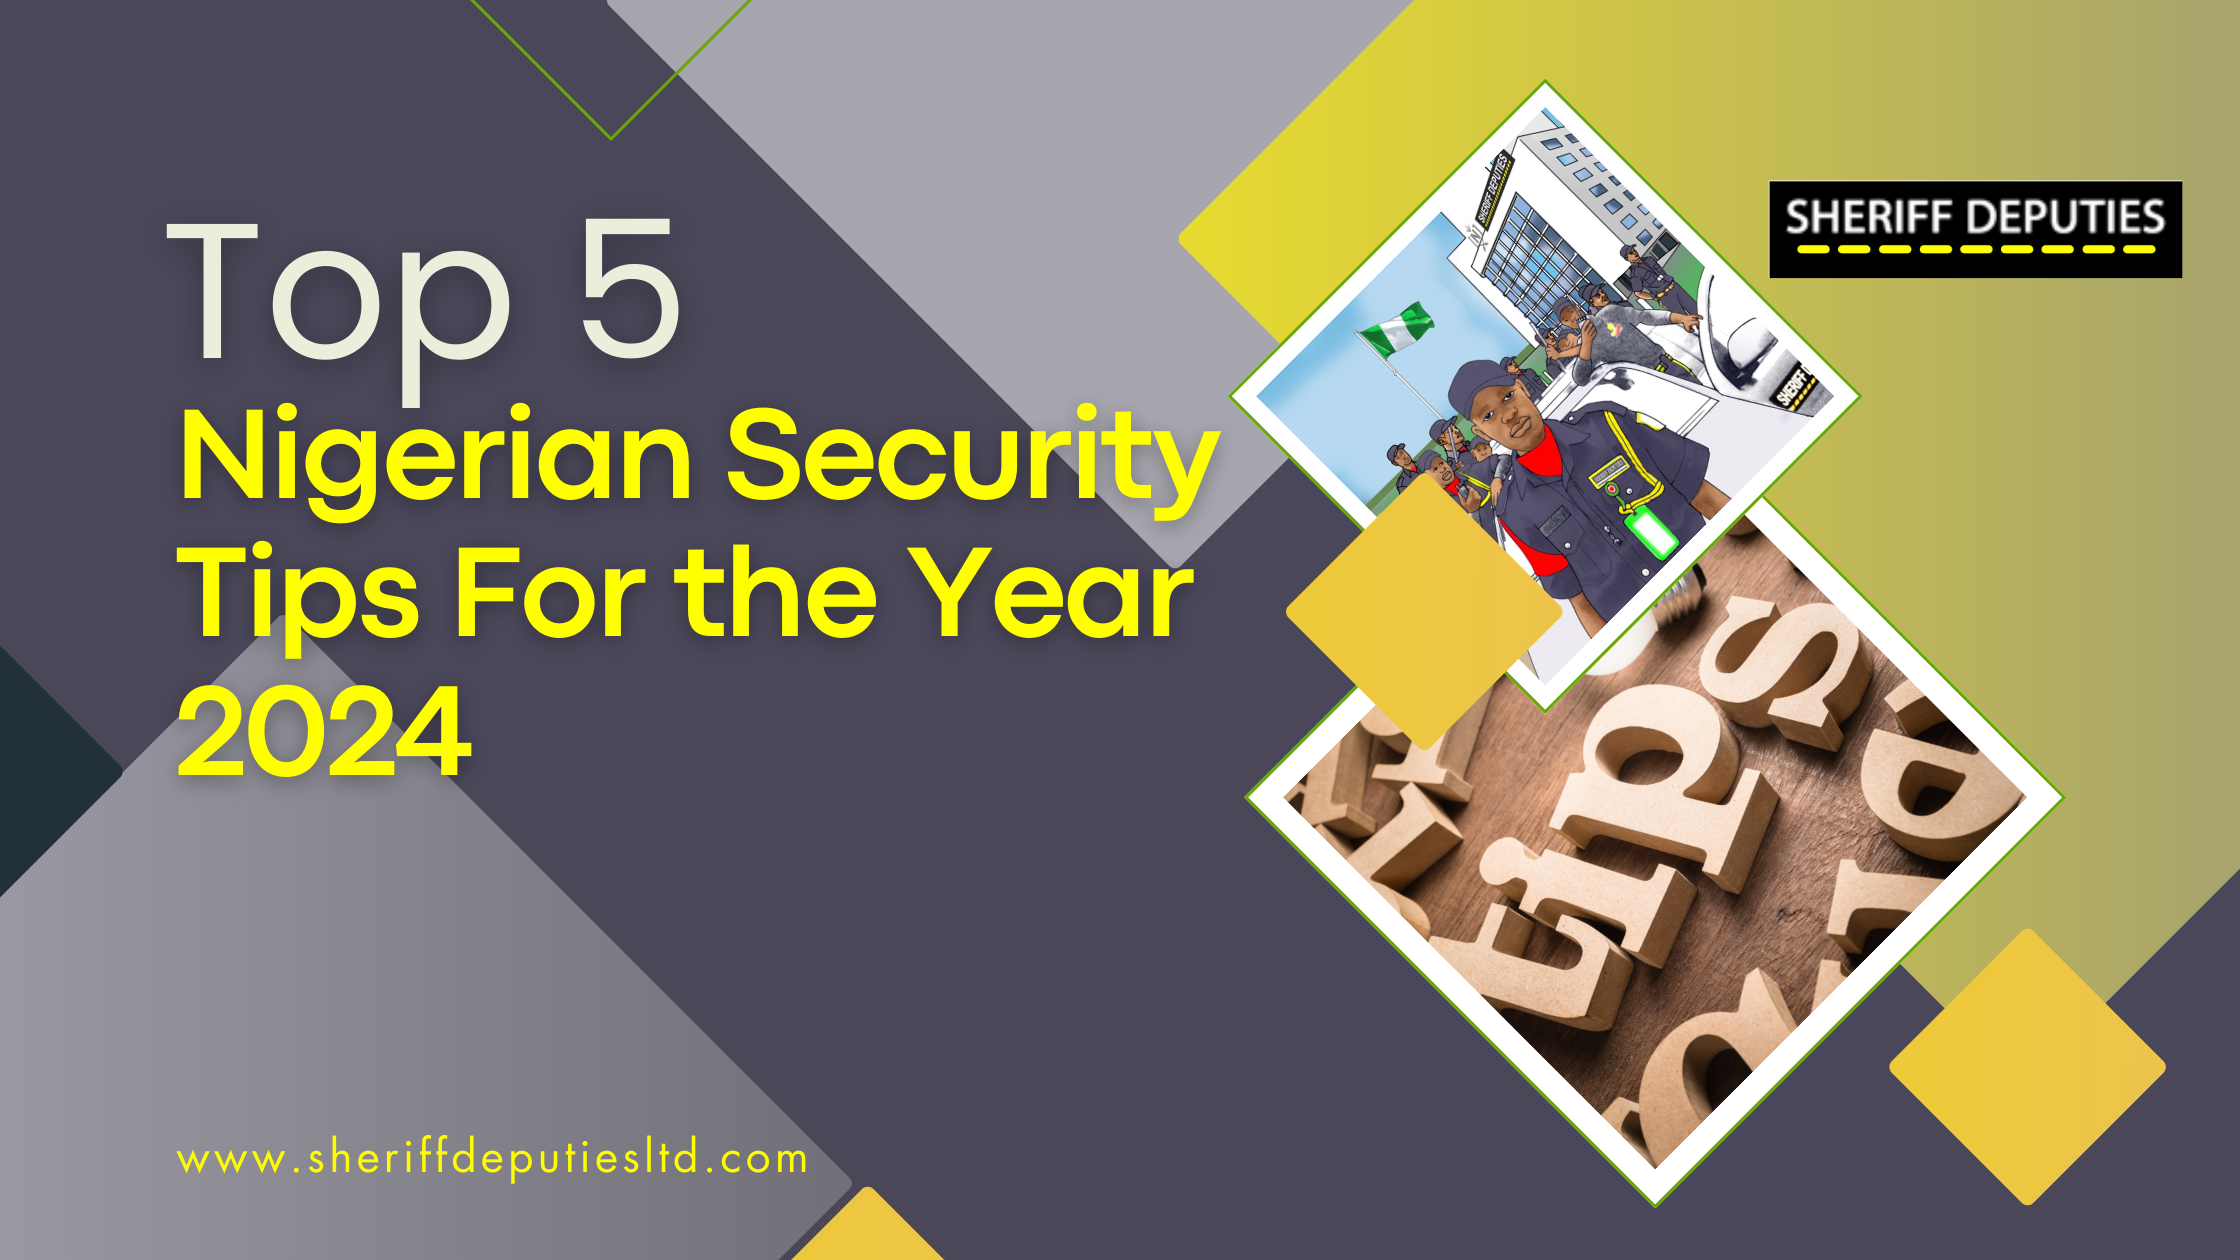 Top 5 Nigerian Security Tips For the Year 2024